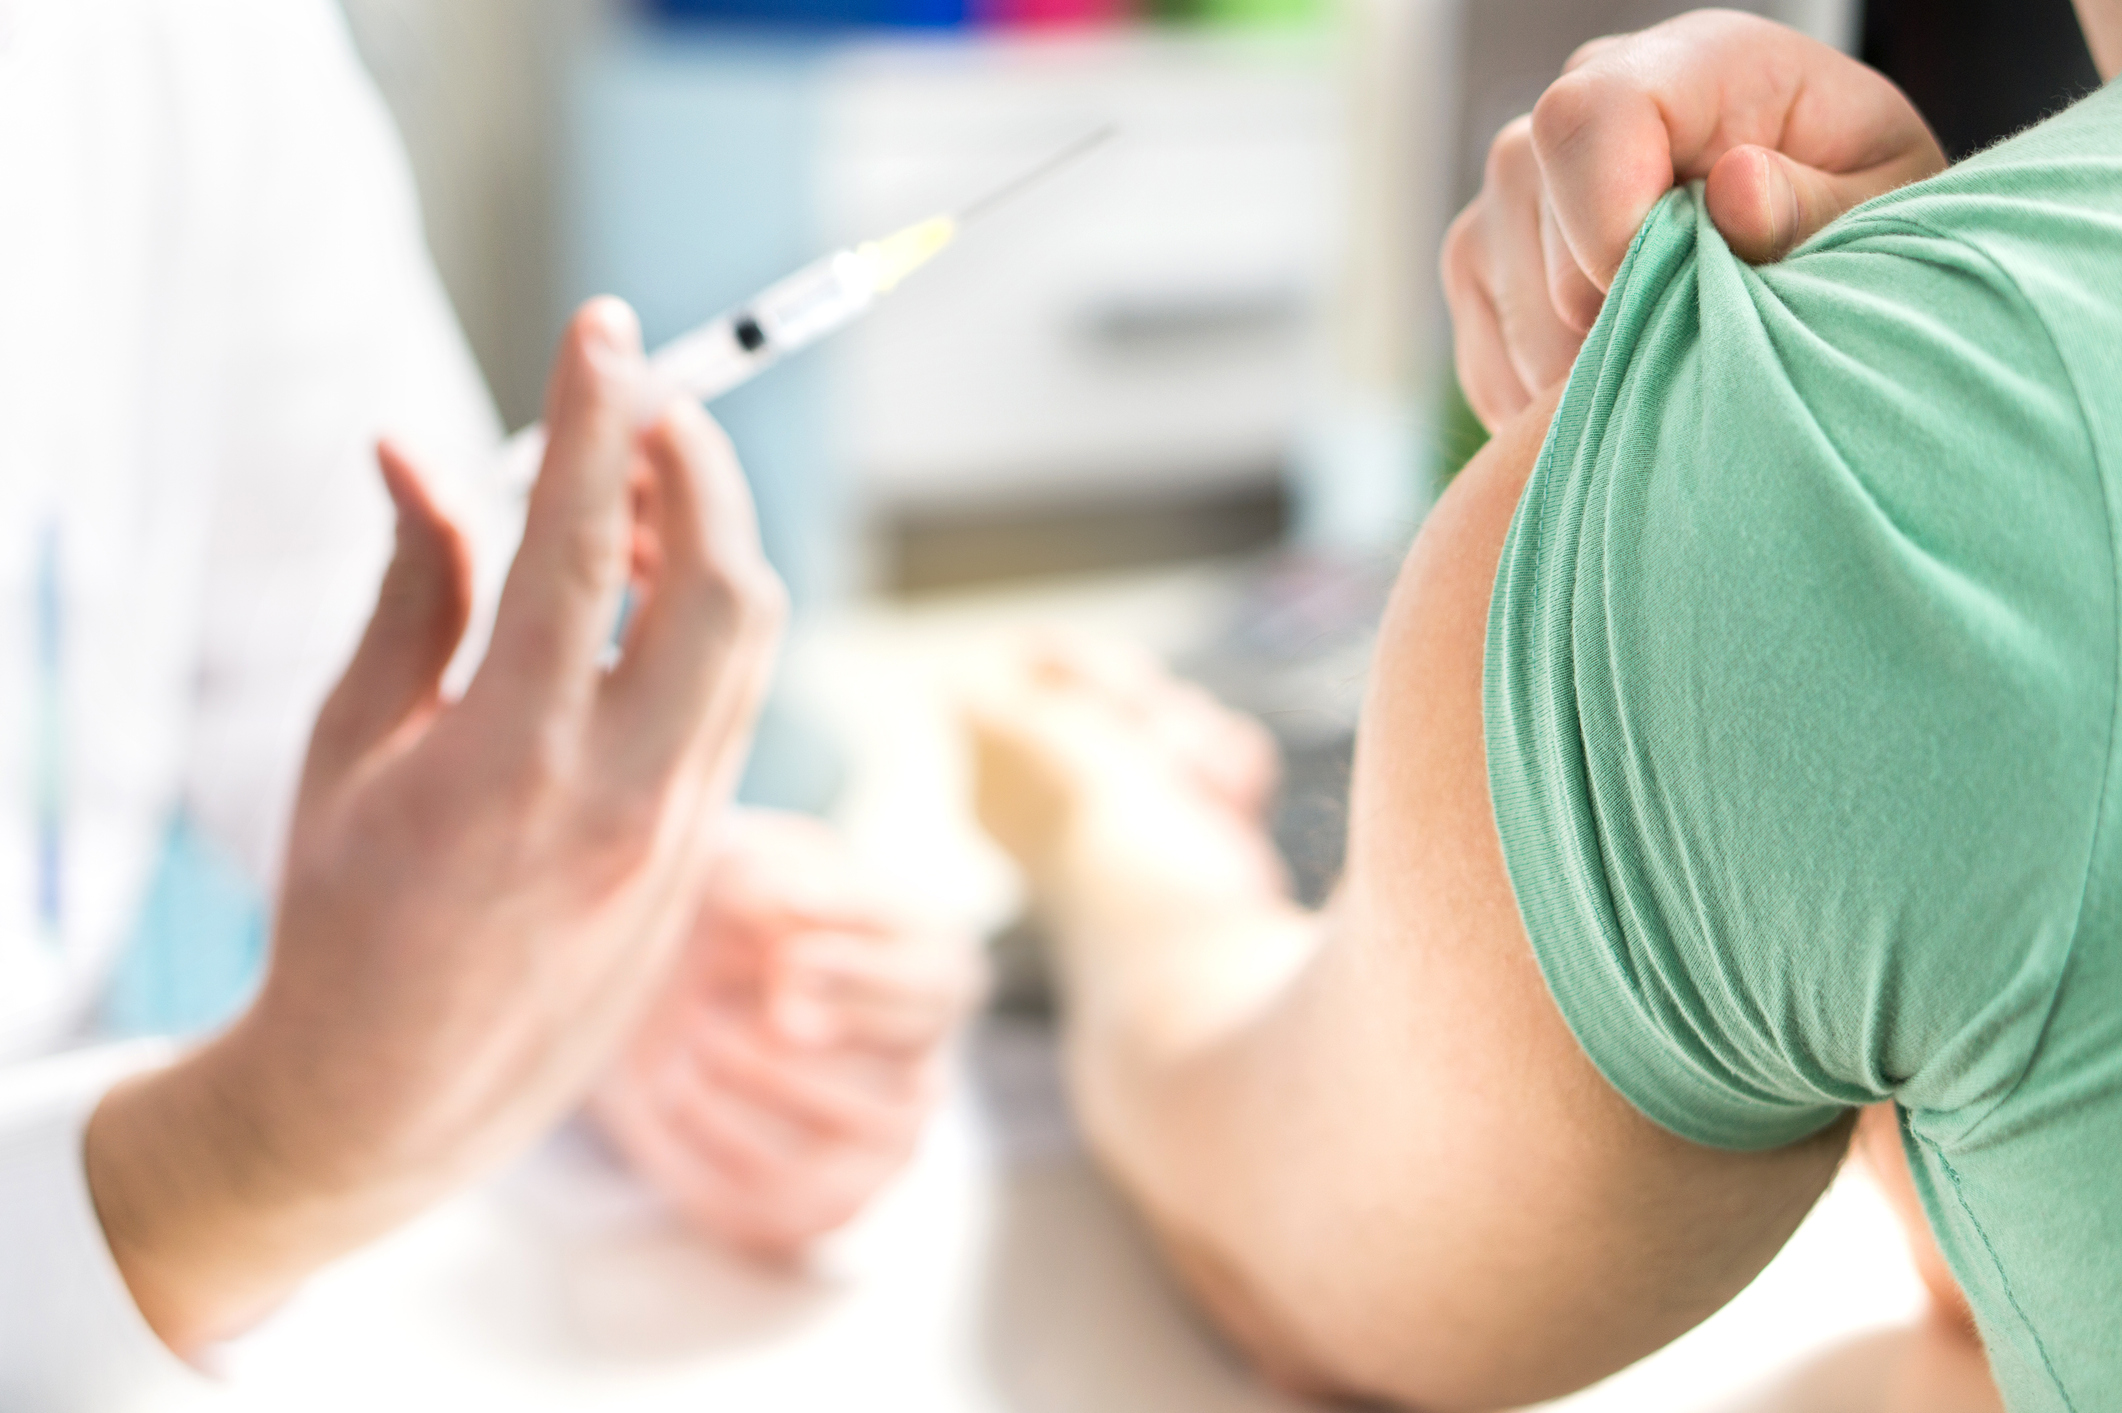 The four legal issues preventing employers from mandating vaccination